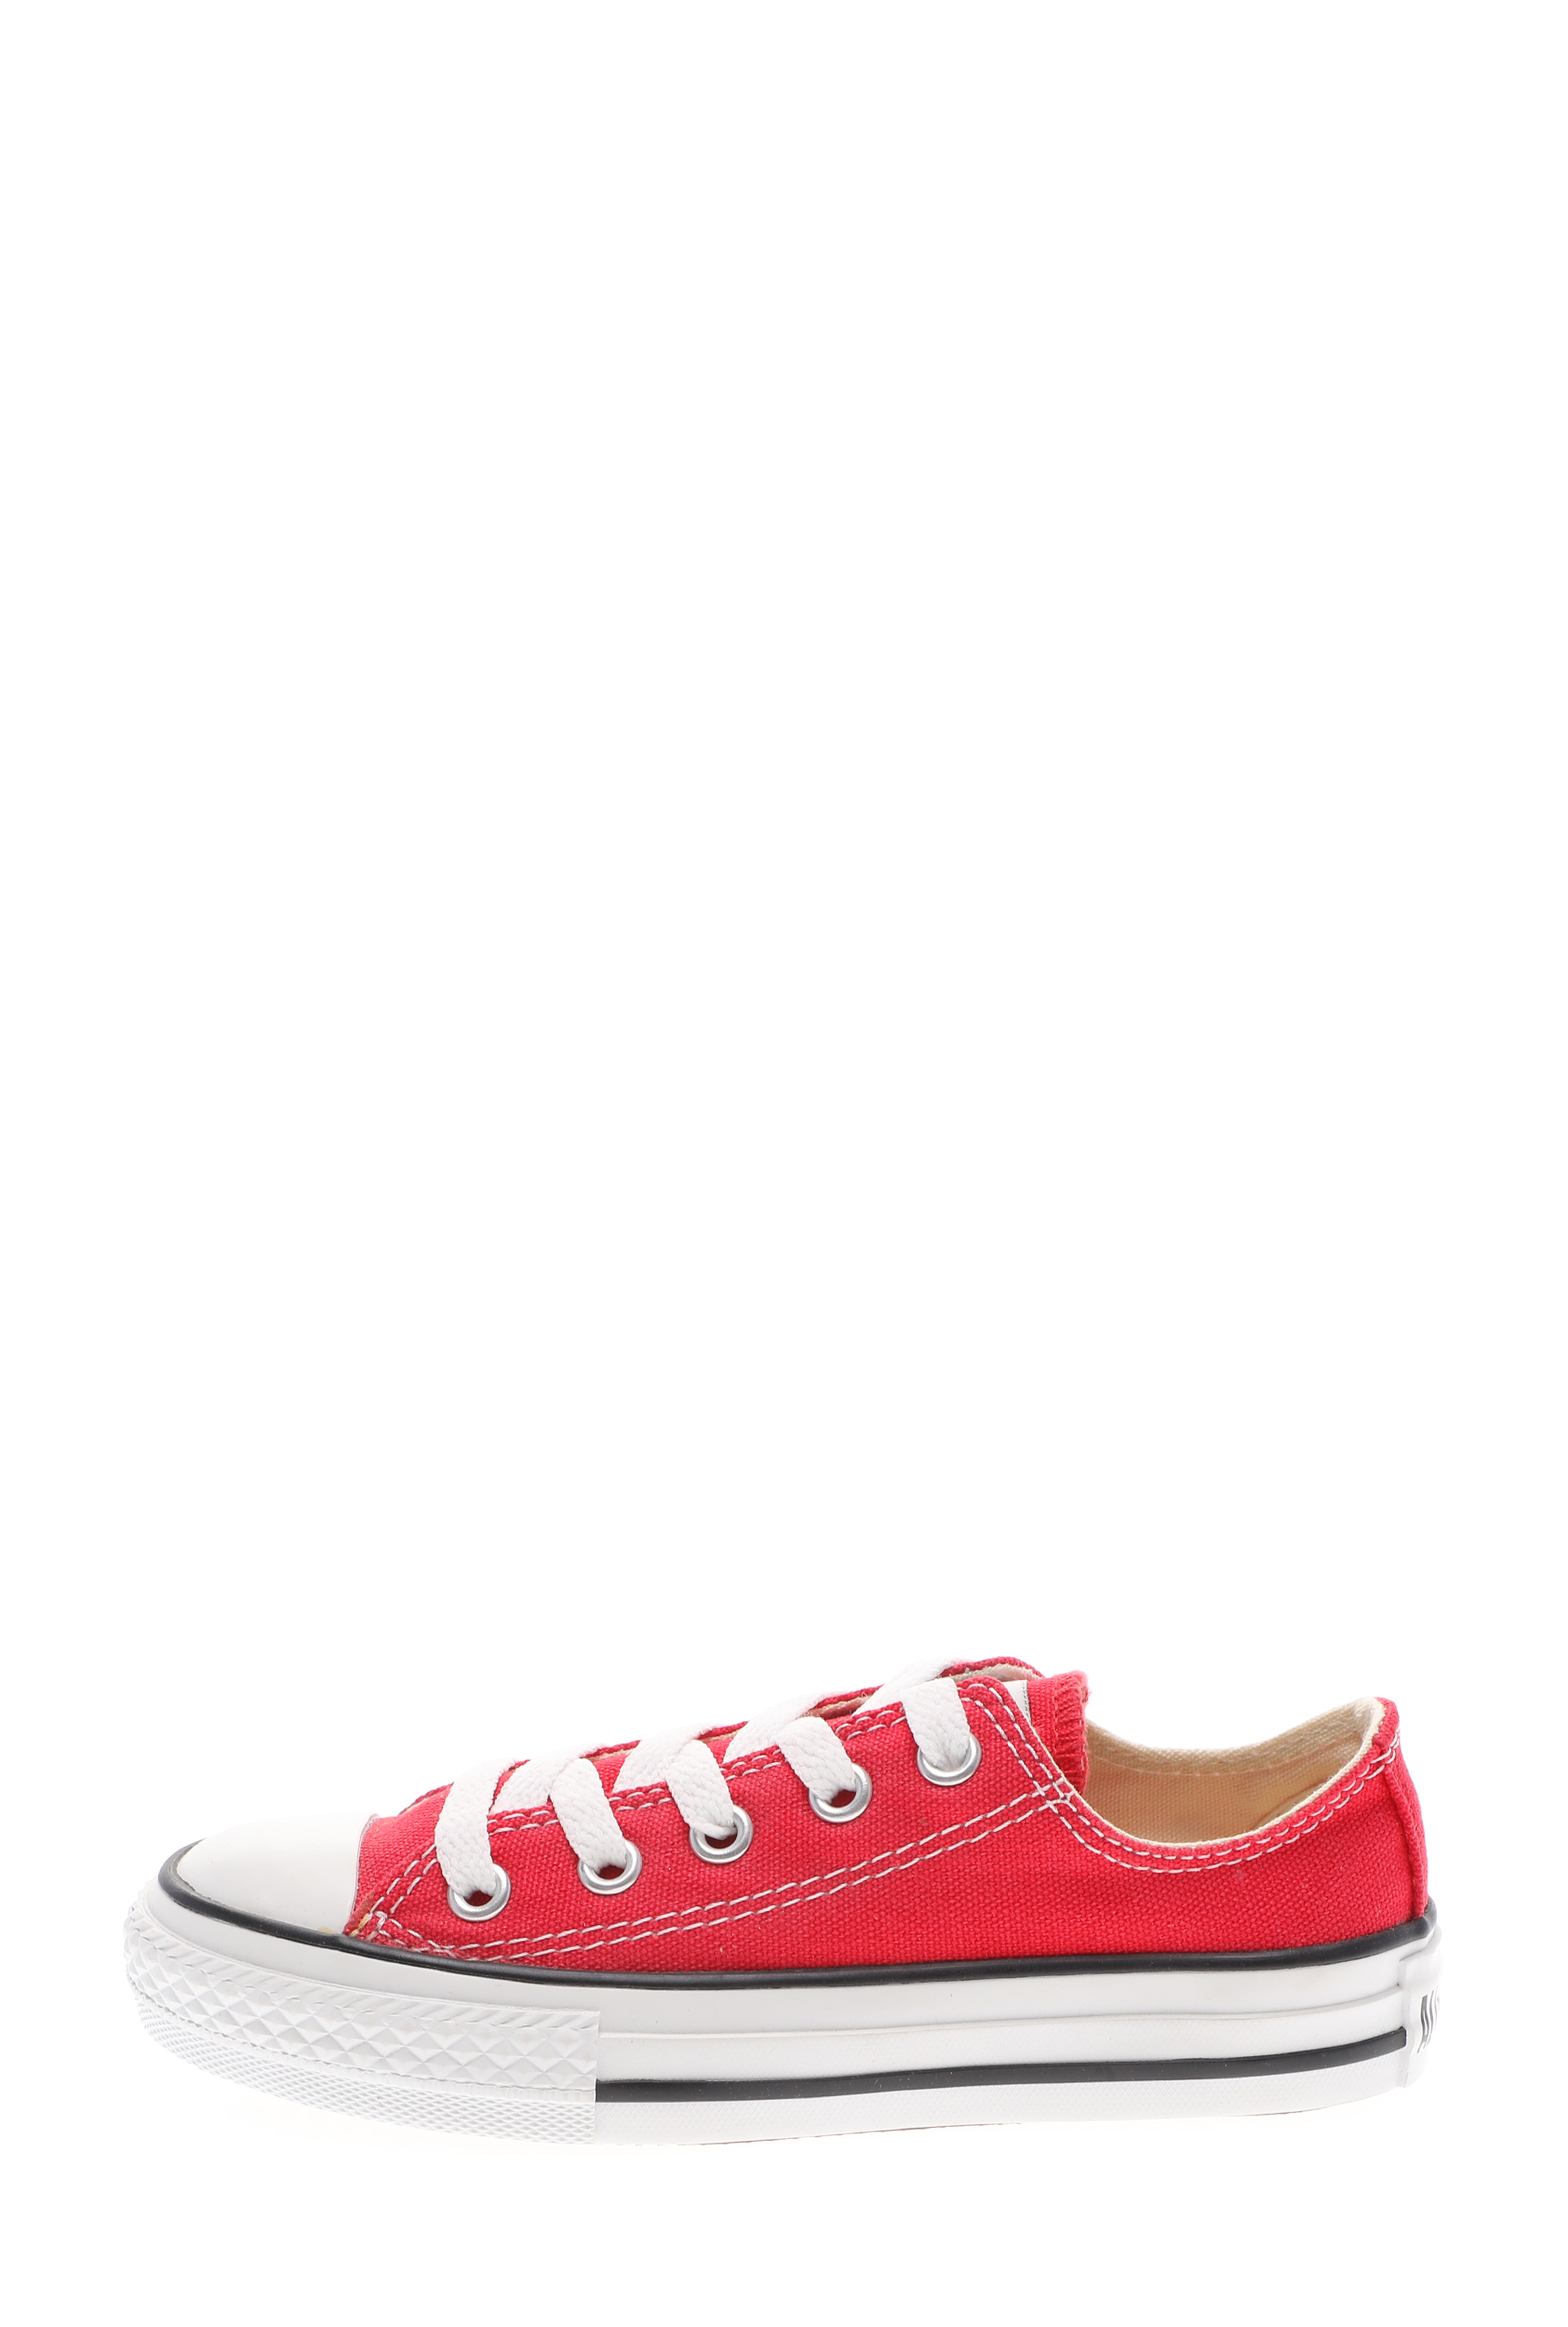 CONVERSE - Παιδικά sneakers CONVERSE Chuck Taylor AS Core OX κόκκινα Παιδικά/Girls/Παπούτσια/Sneakers